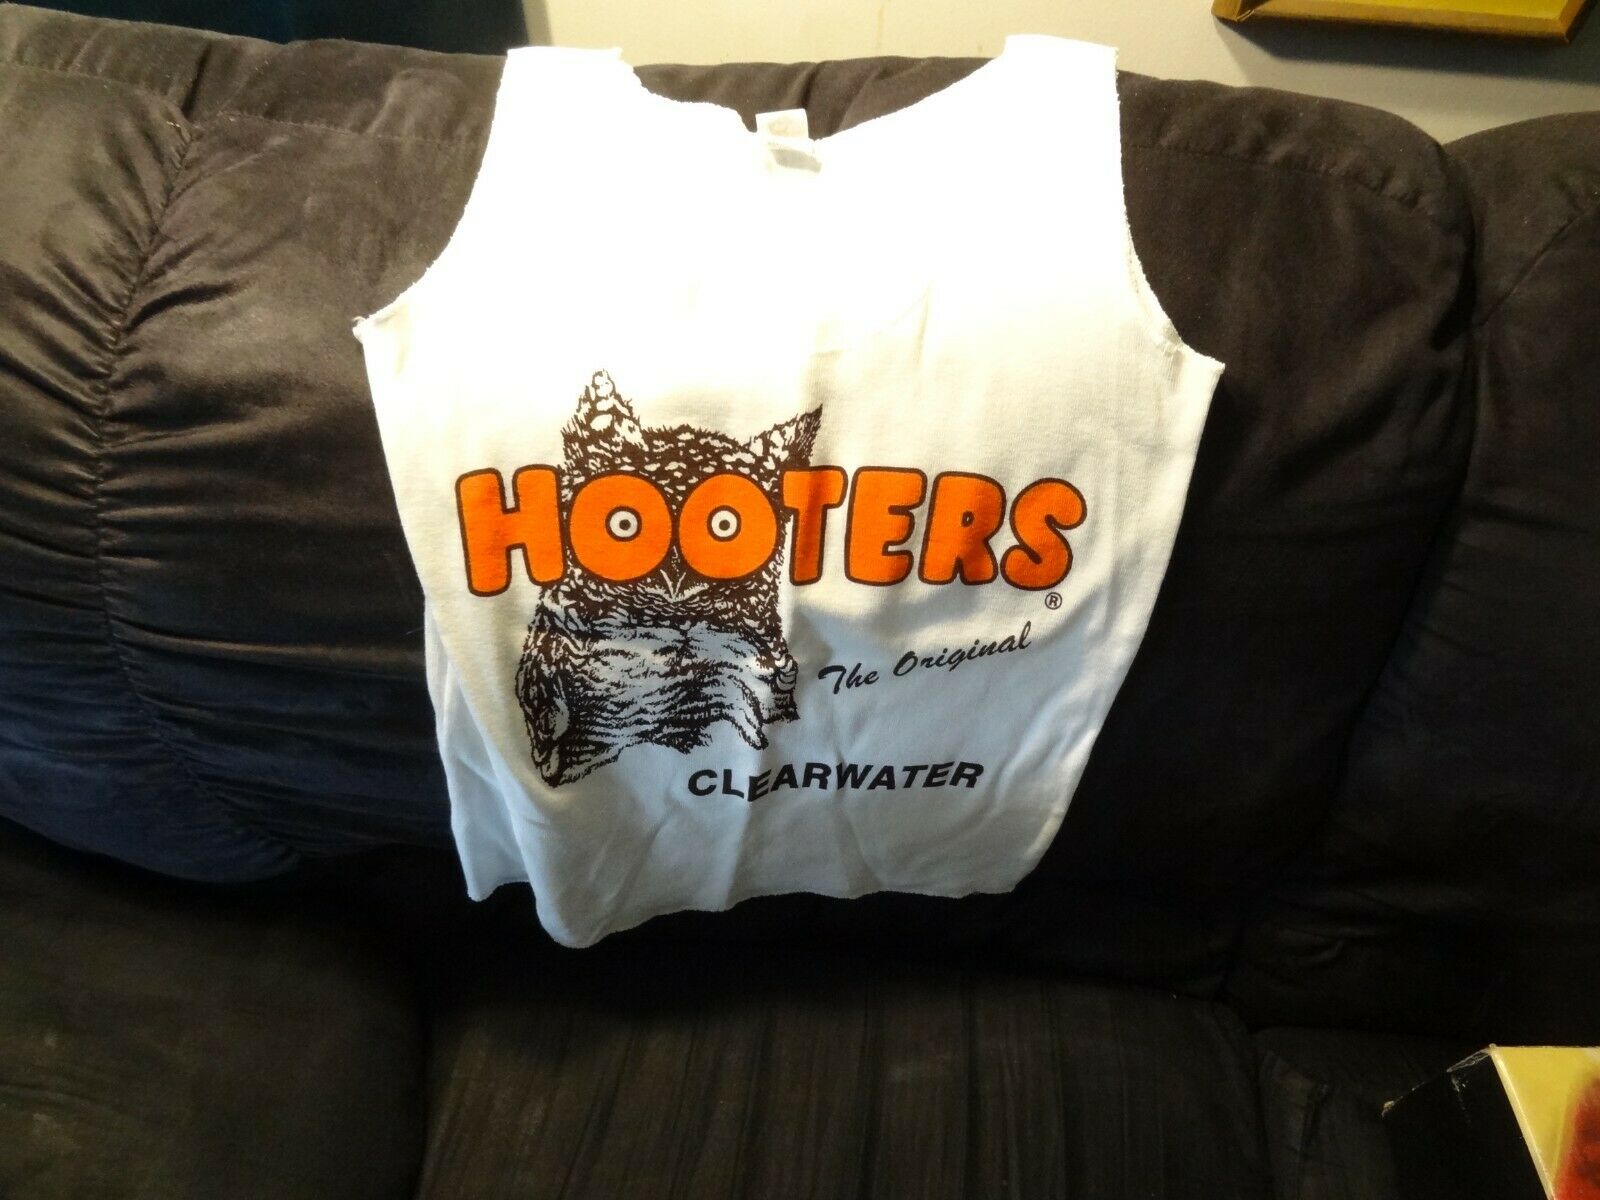 HOOTERS ORIGINAL CLEARWATER FLORIDA UNIFORM SHIRT SIZE LARGE VERY GENTLY USED